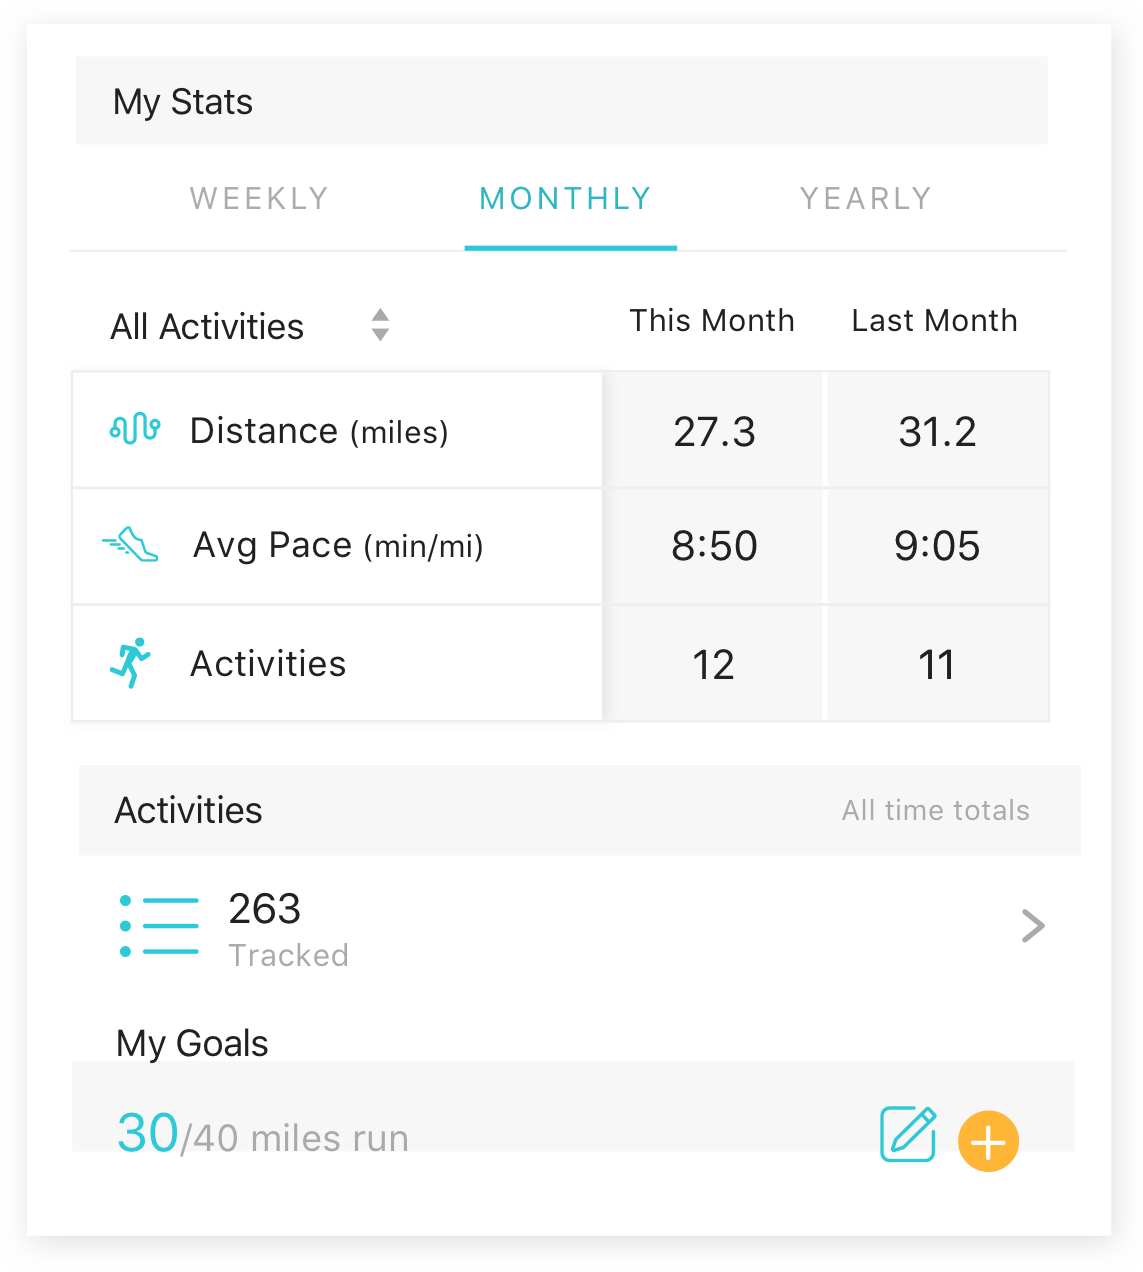 A screenshot of running stats from the Runkeeper app, including distance, pace, and activities.